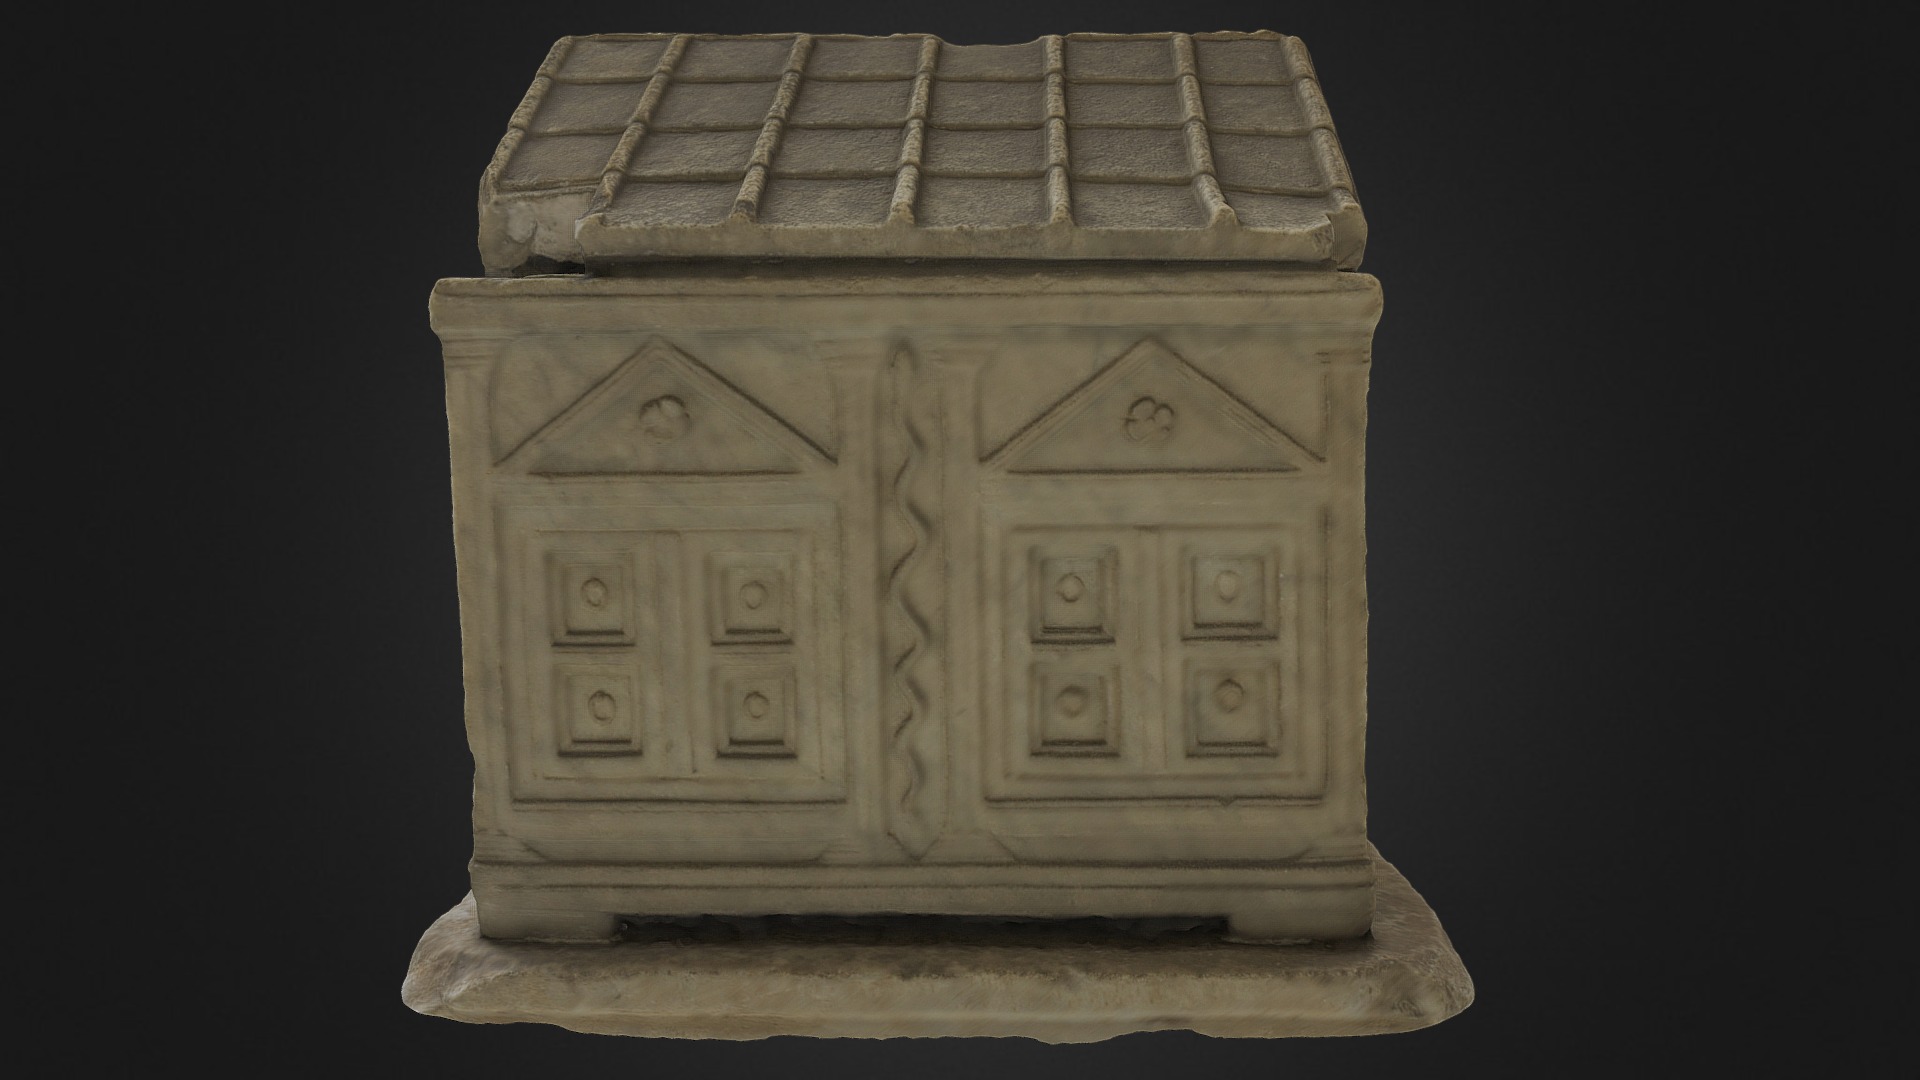 3D model 2018 – Ossario – Musei Vaticani - This is a 3D model of the 2018 - Ossario - Musei Vaticani. The 3D model is about a wooden box with carvings.